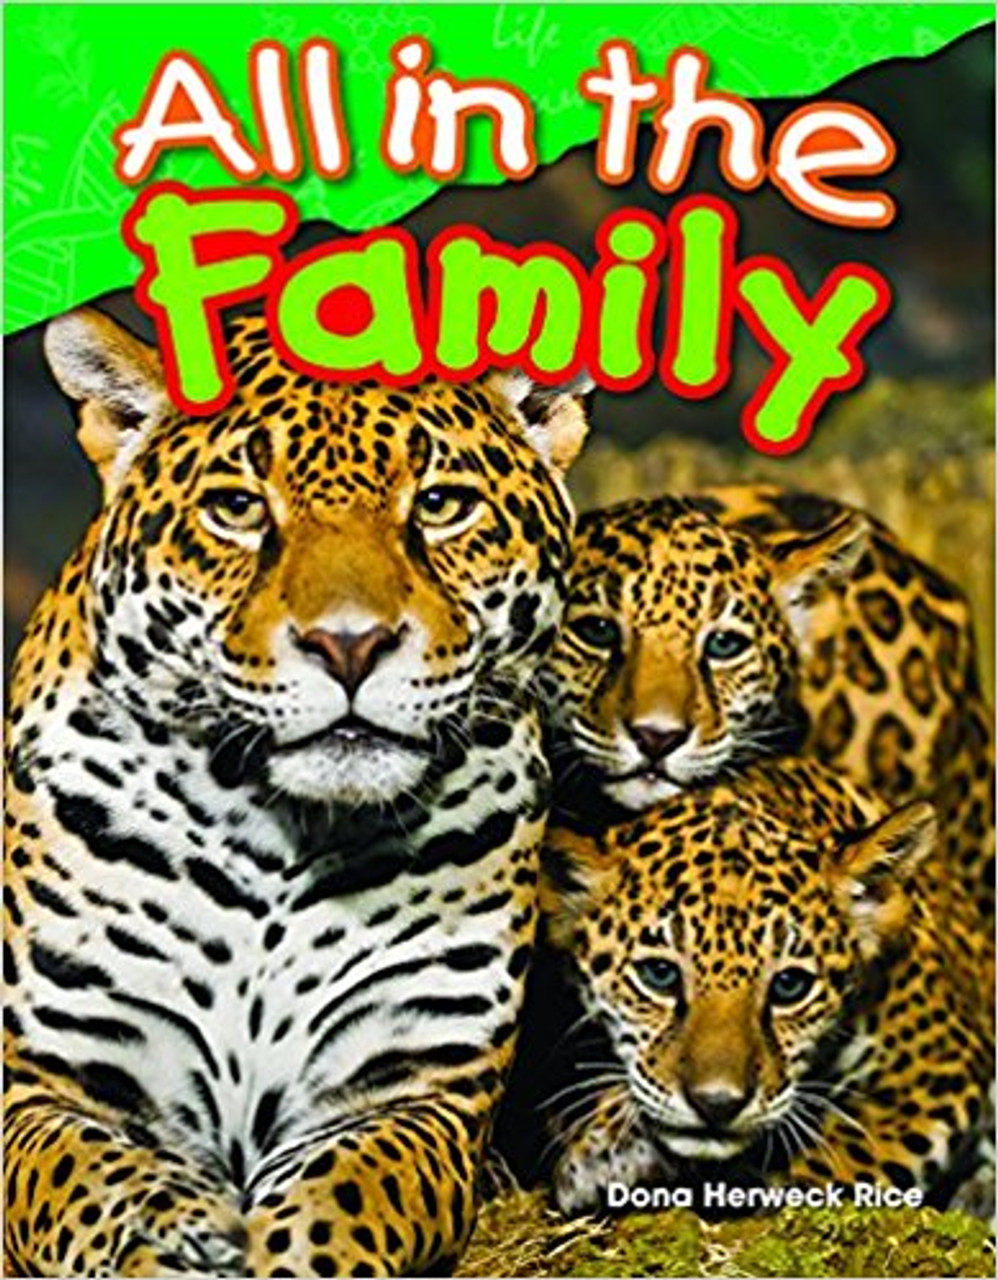 All in the Family by Dona Herweck Rice